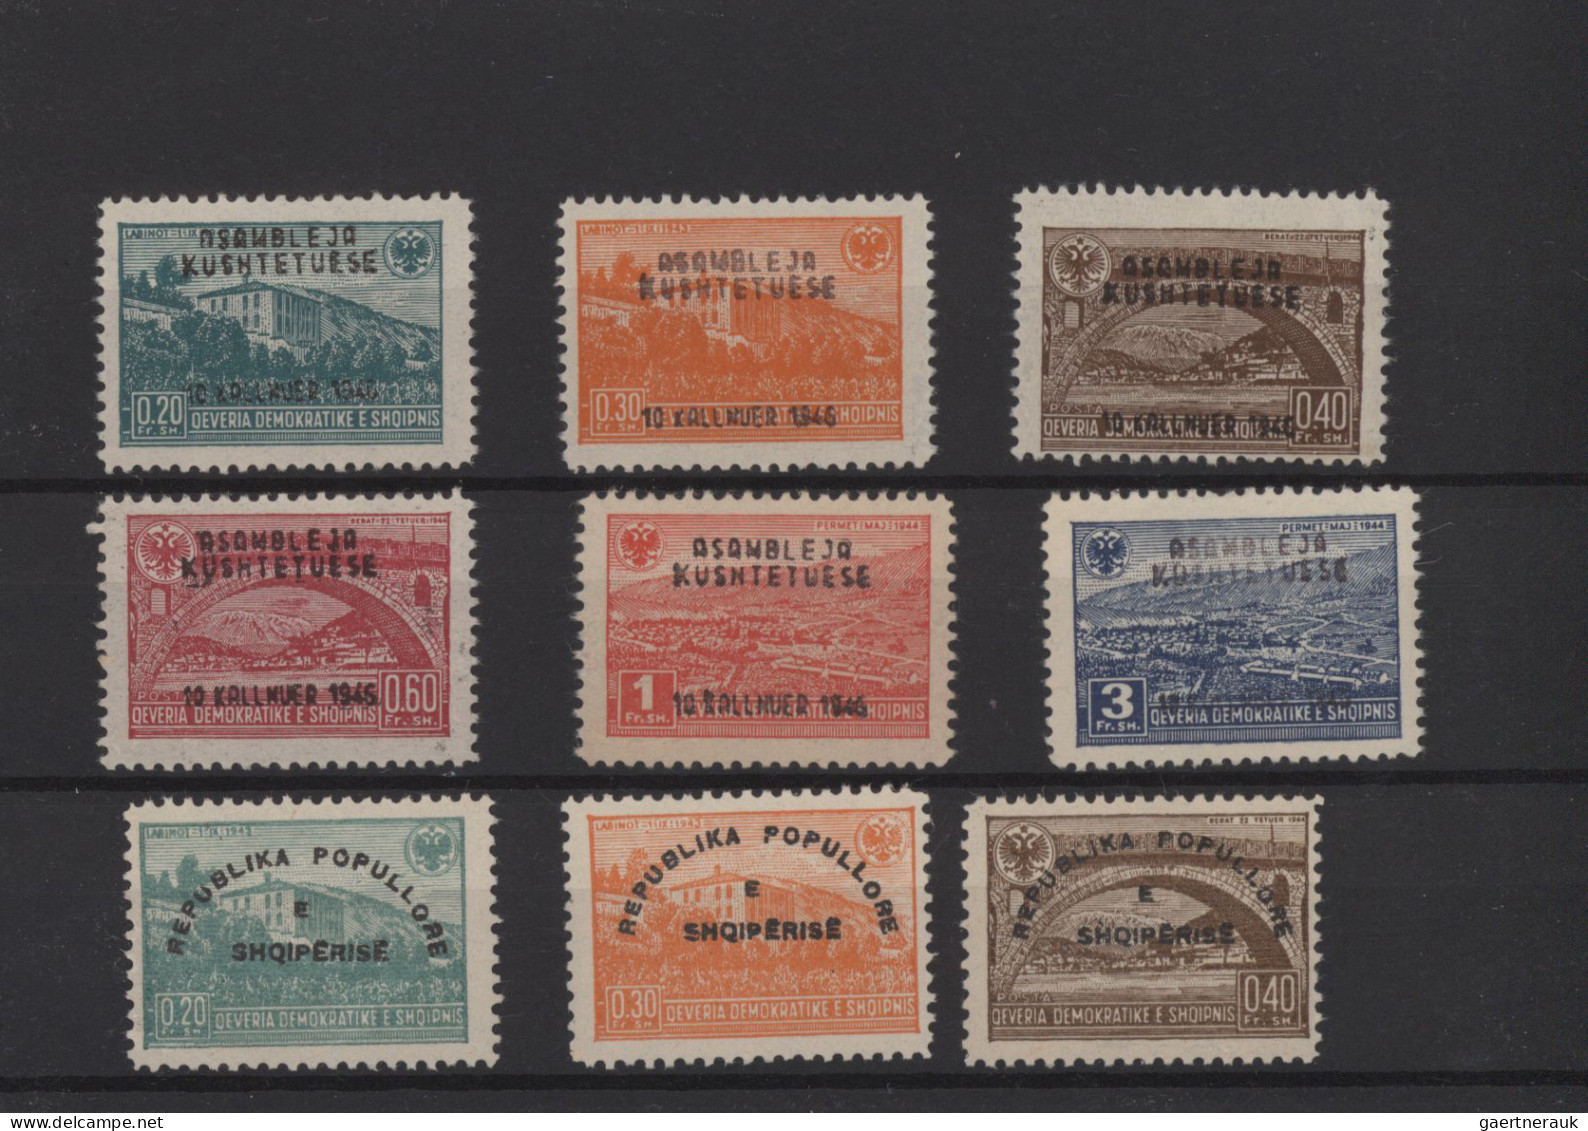 Albania: 1938/1996 (ca.), accumulation mostly MNH on stockcards with a very nice